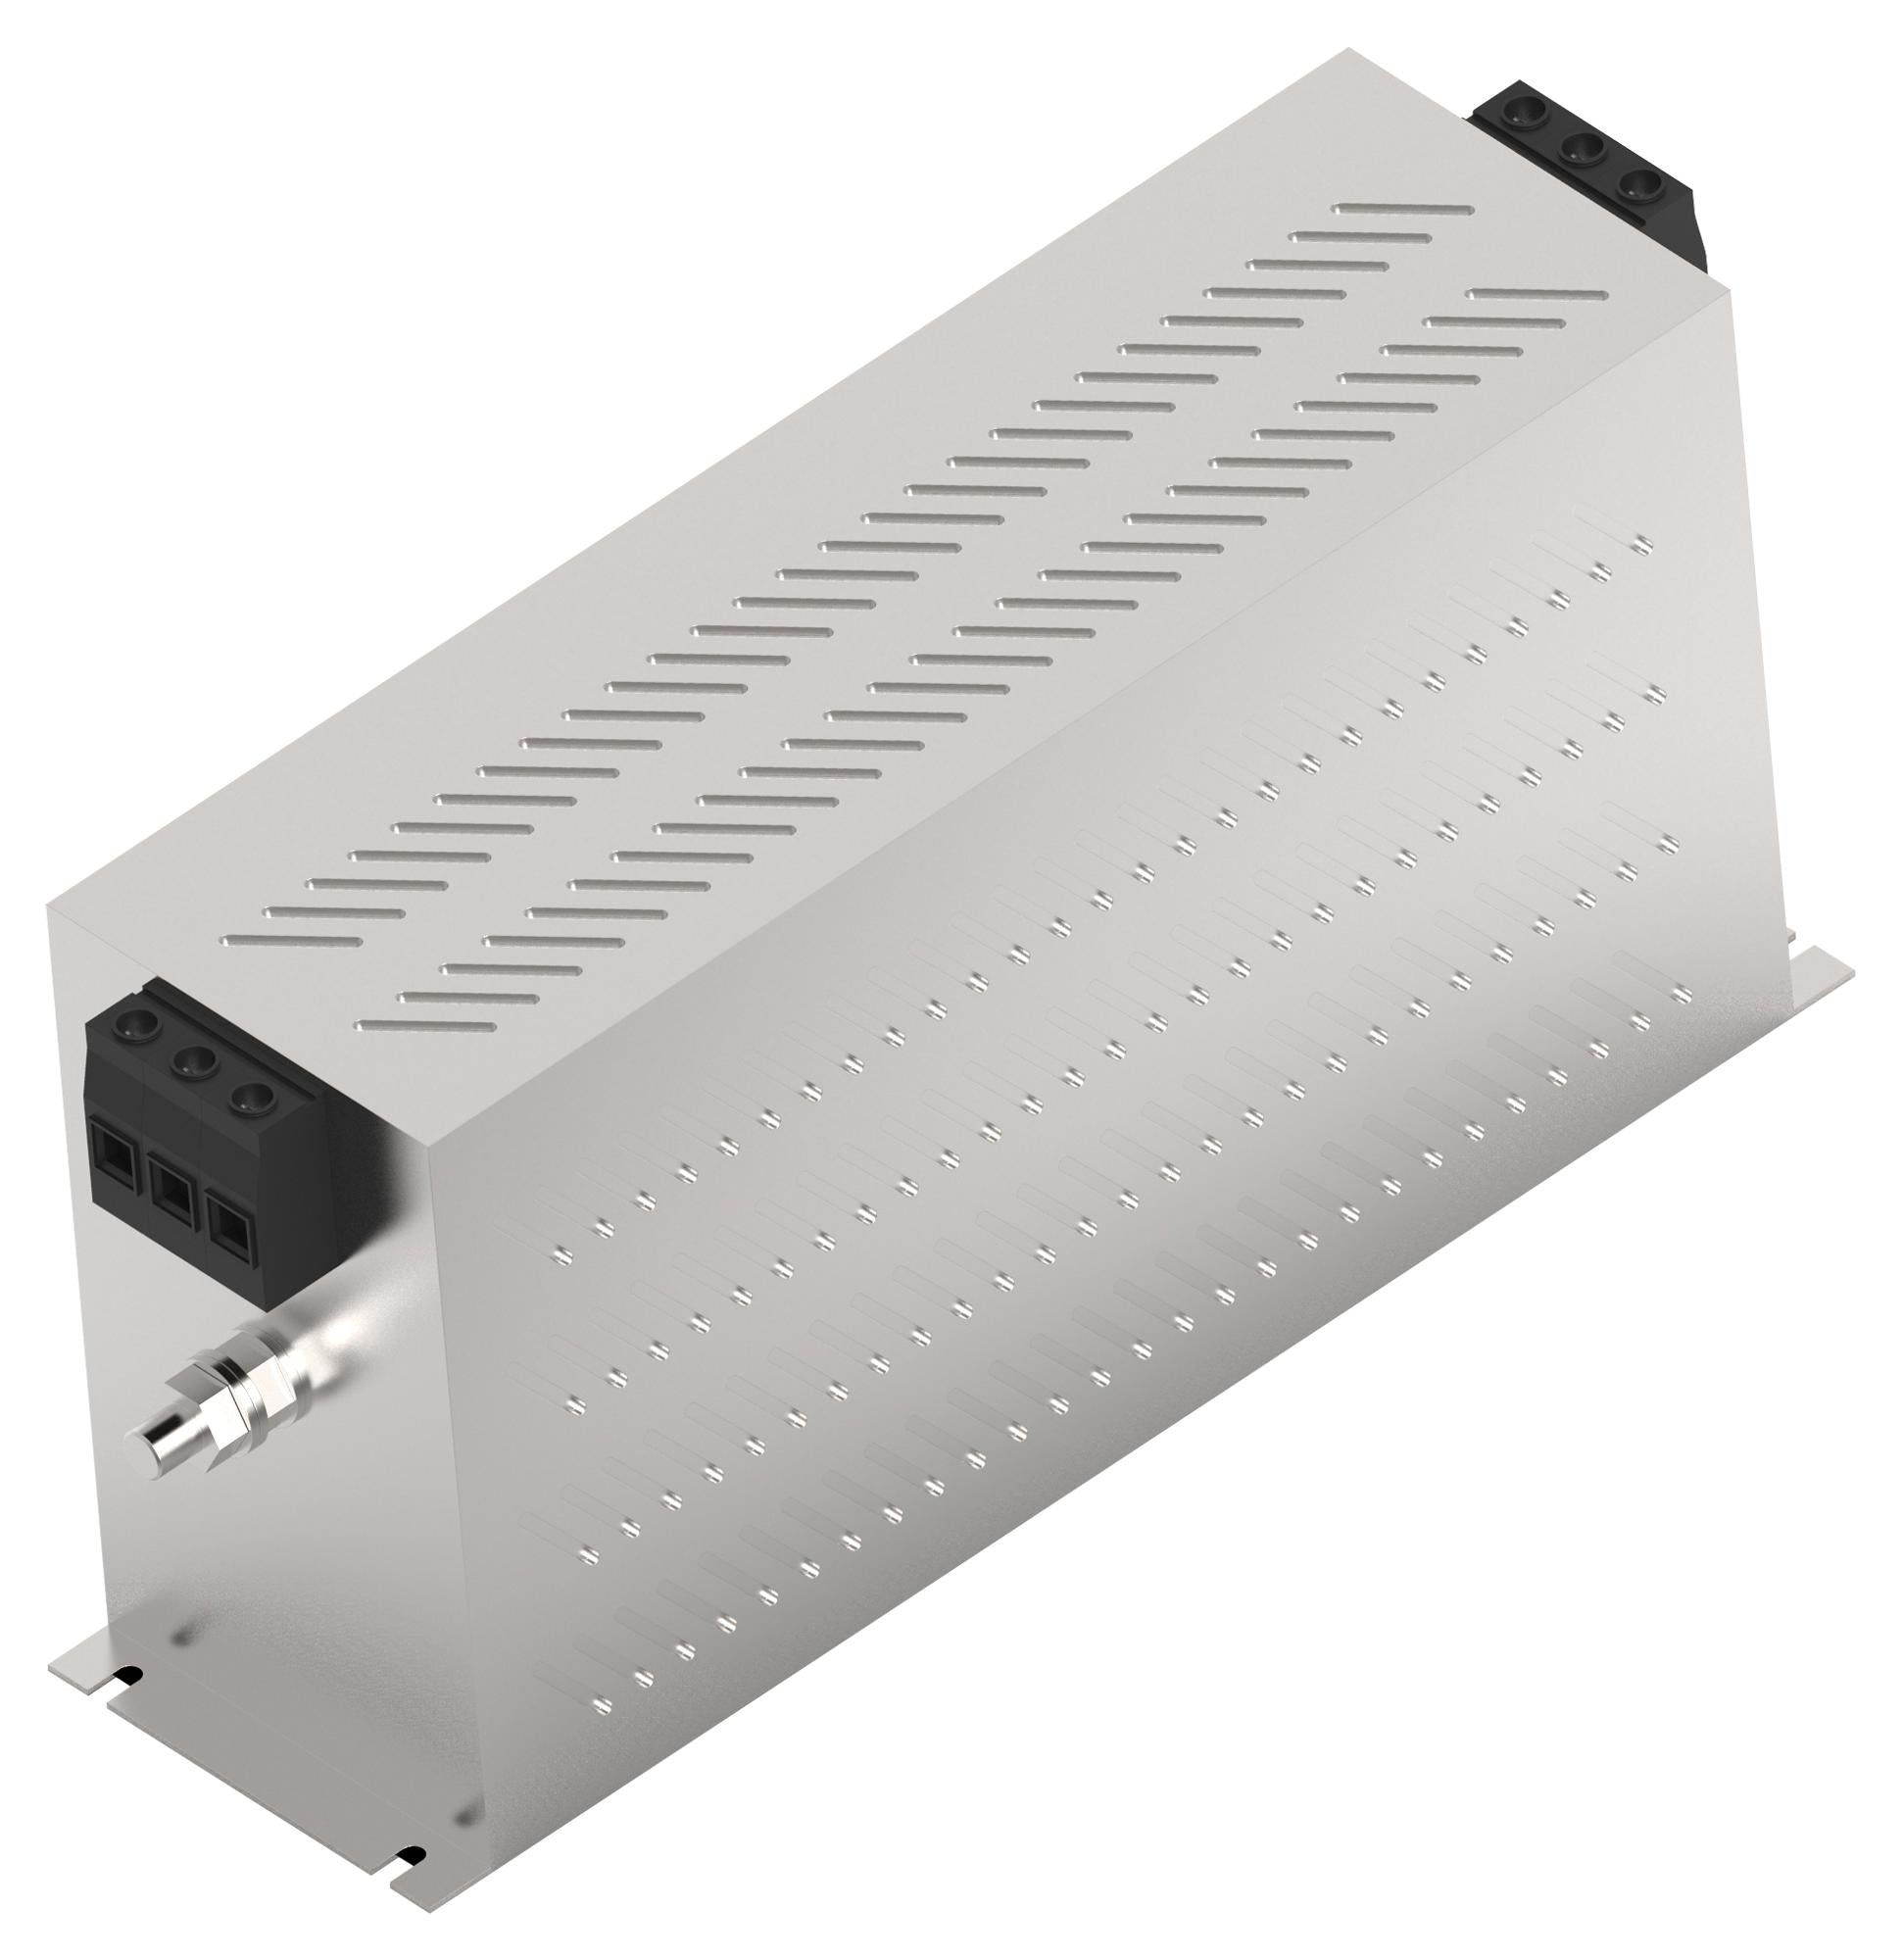 100KEHD10ABSD POWER LINE FILTER, 3 PHASE, 100A, 440VAC CORCOM - TE CONNECTIVITY